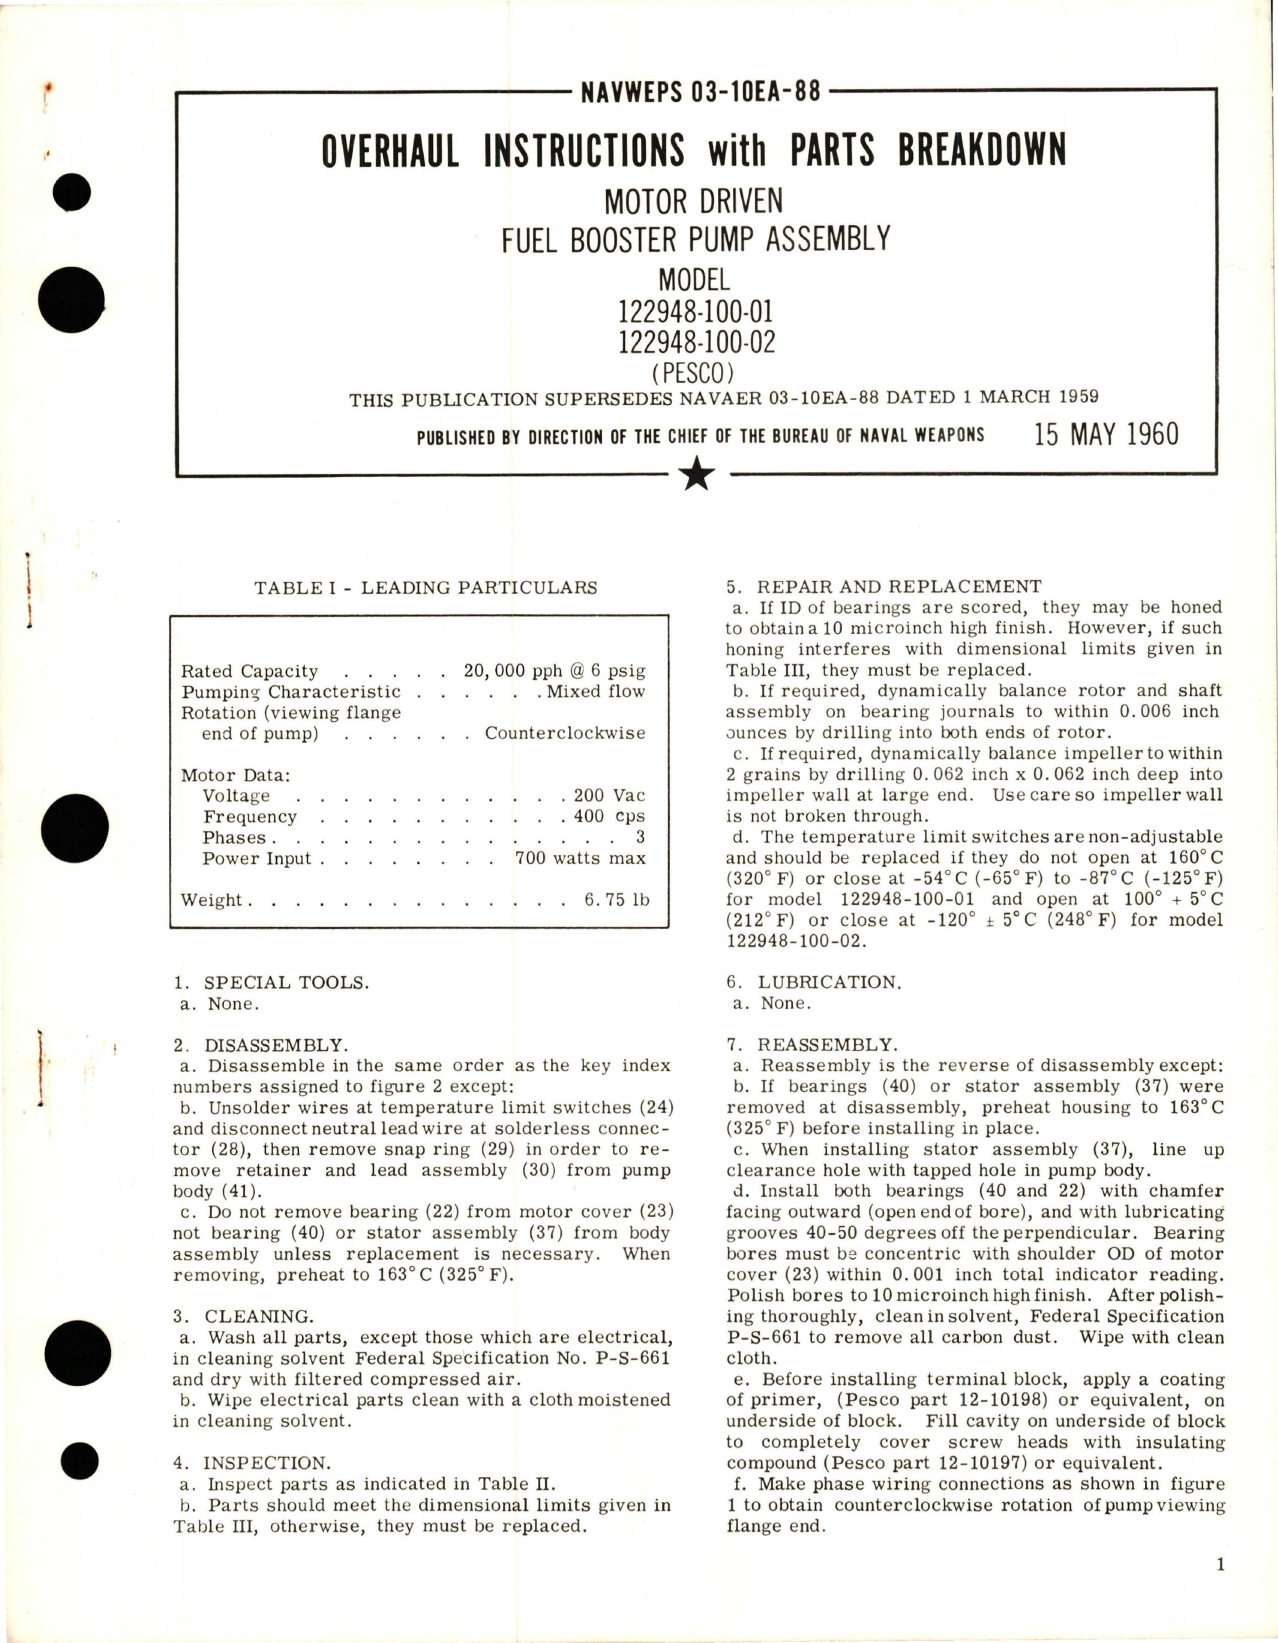 Sample page 1 from AirCorps Library document: Overhaul Instructions with Parts Breakdown for Motor Driven Fuel Booster Pump Assembly - Model 122948-100-01 and 122948-100-02